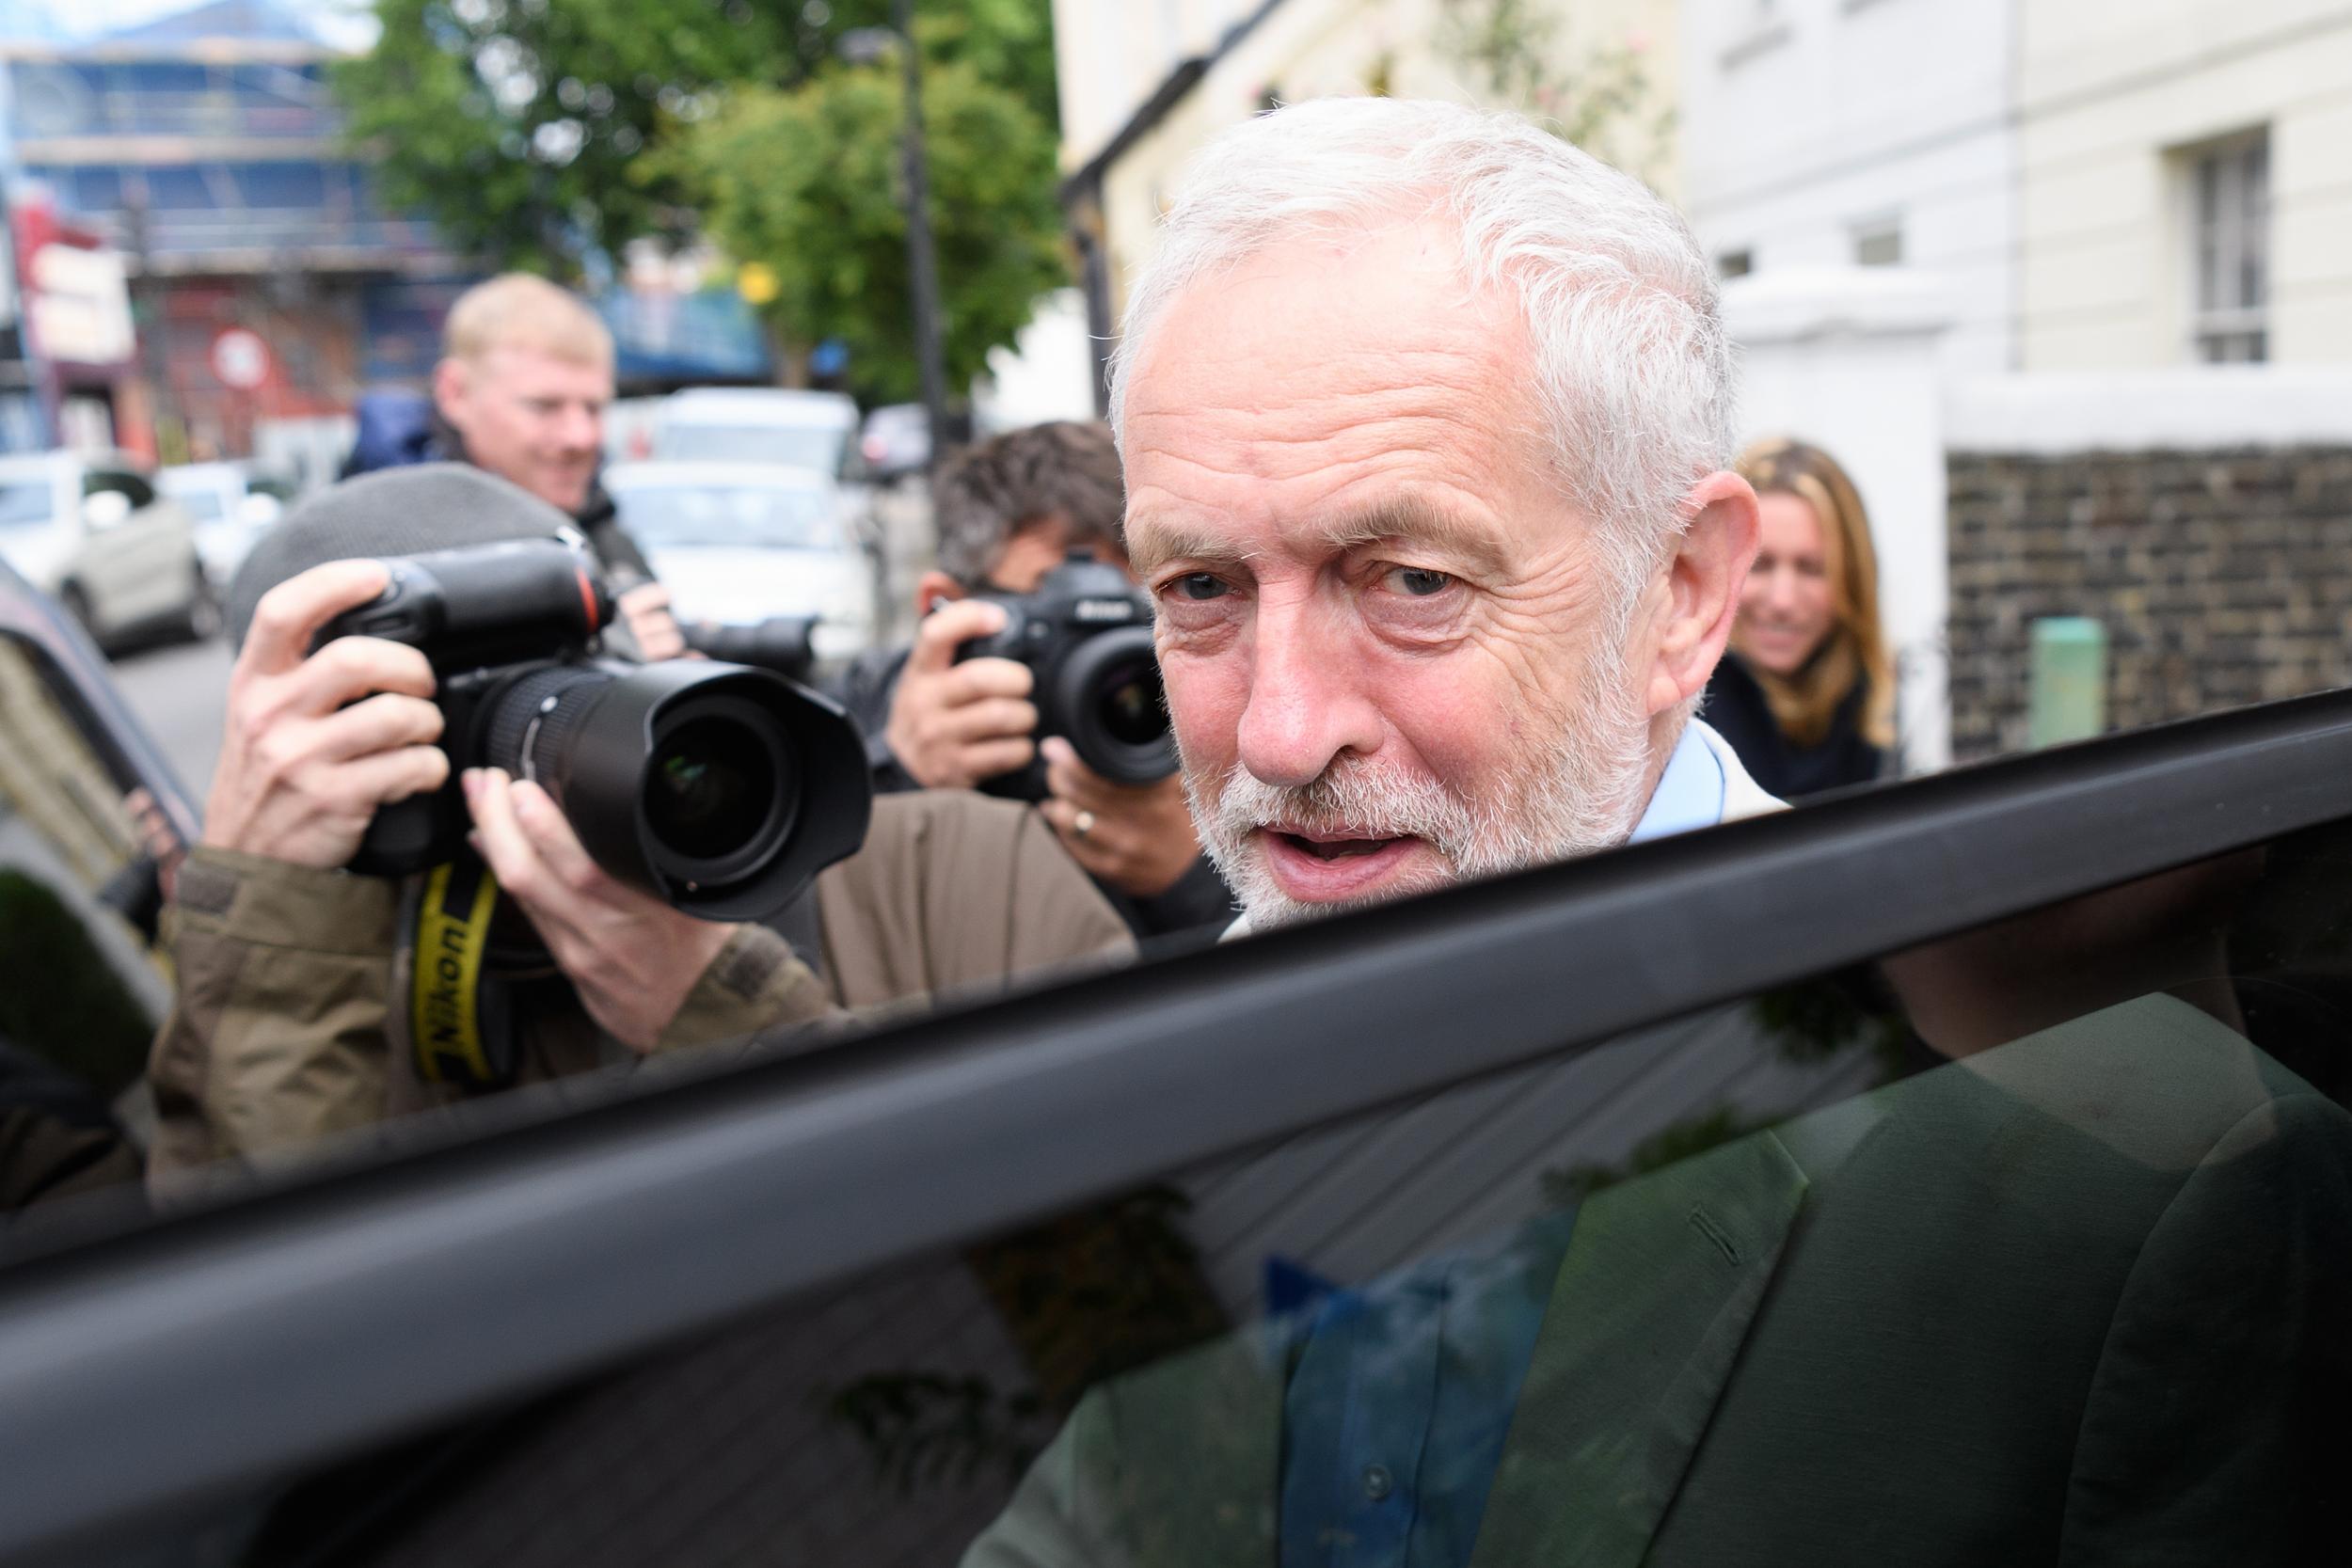 Jeremy Corbyn has silenced many of his critics within Labour after the general election result